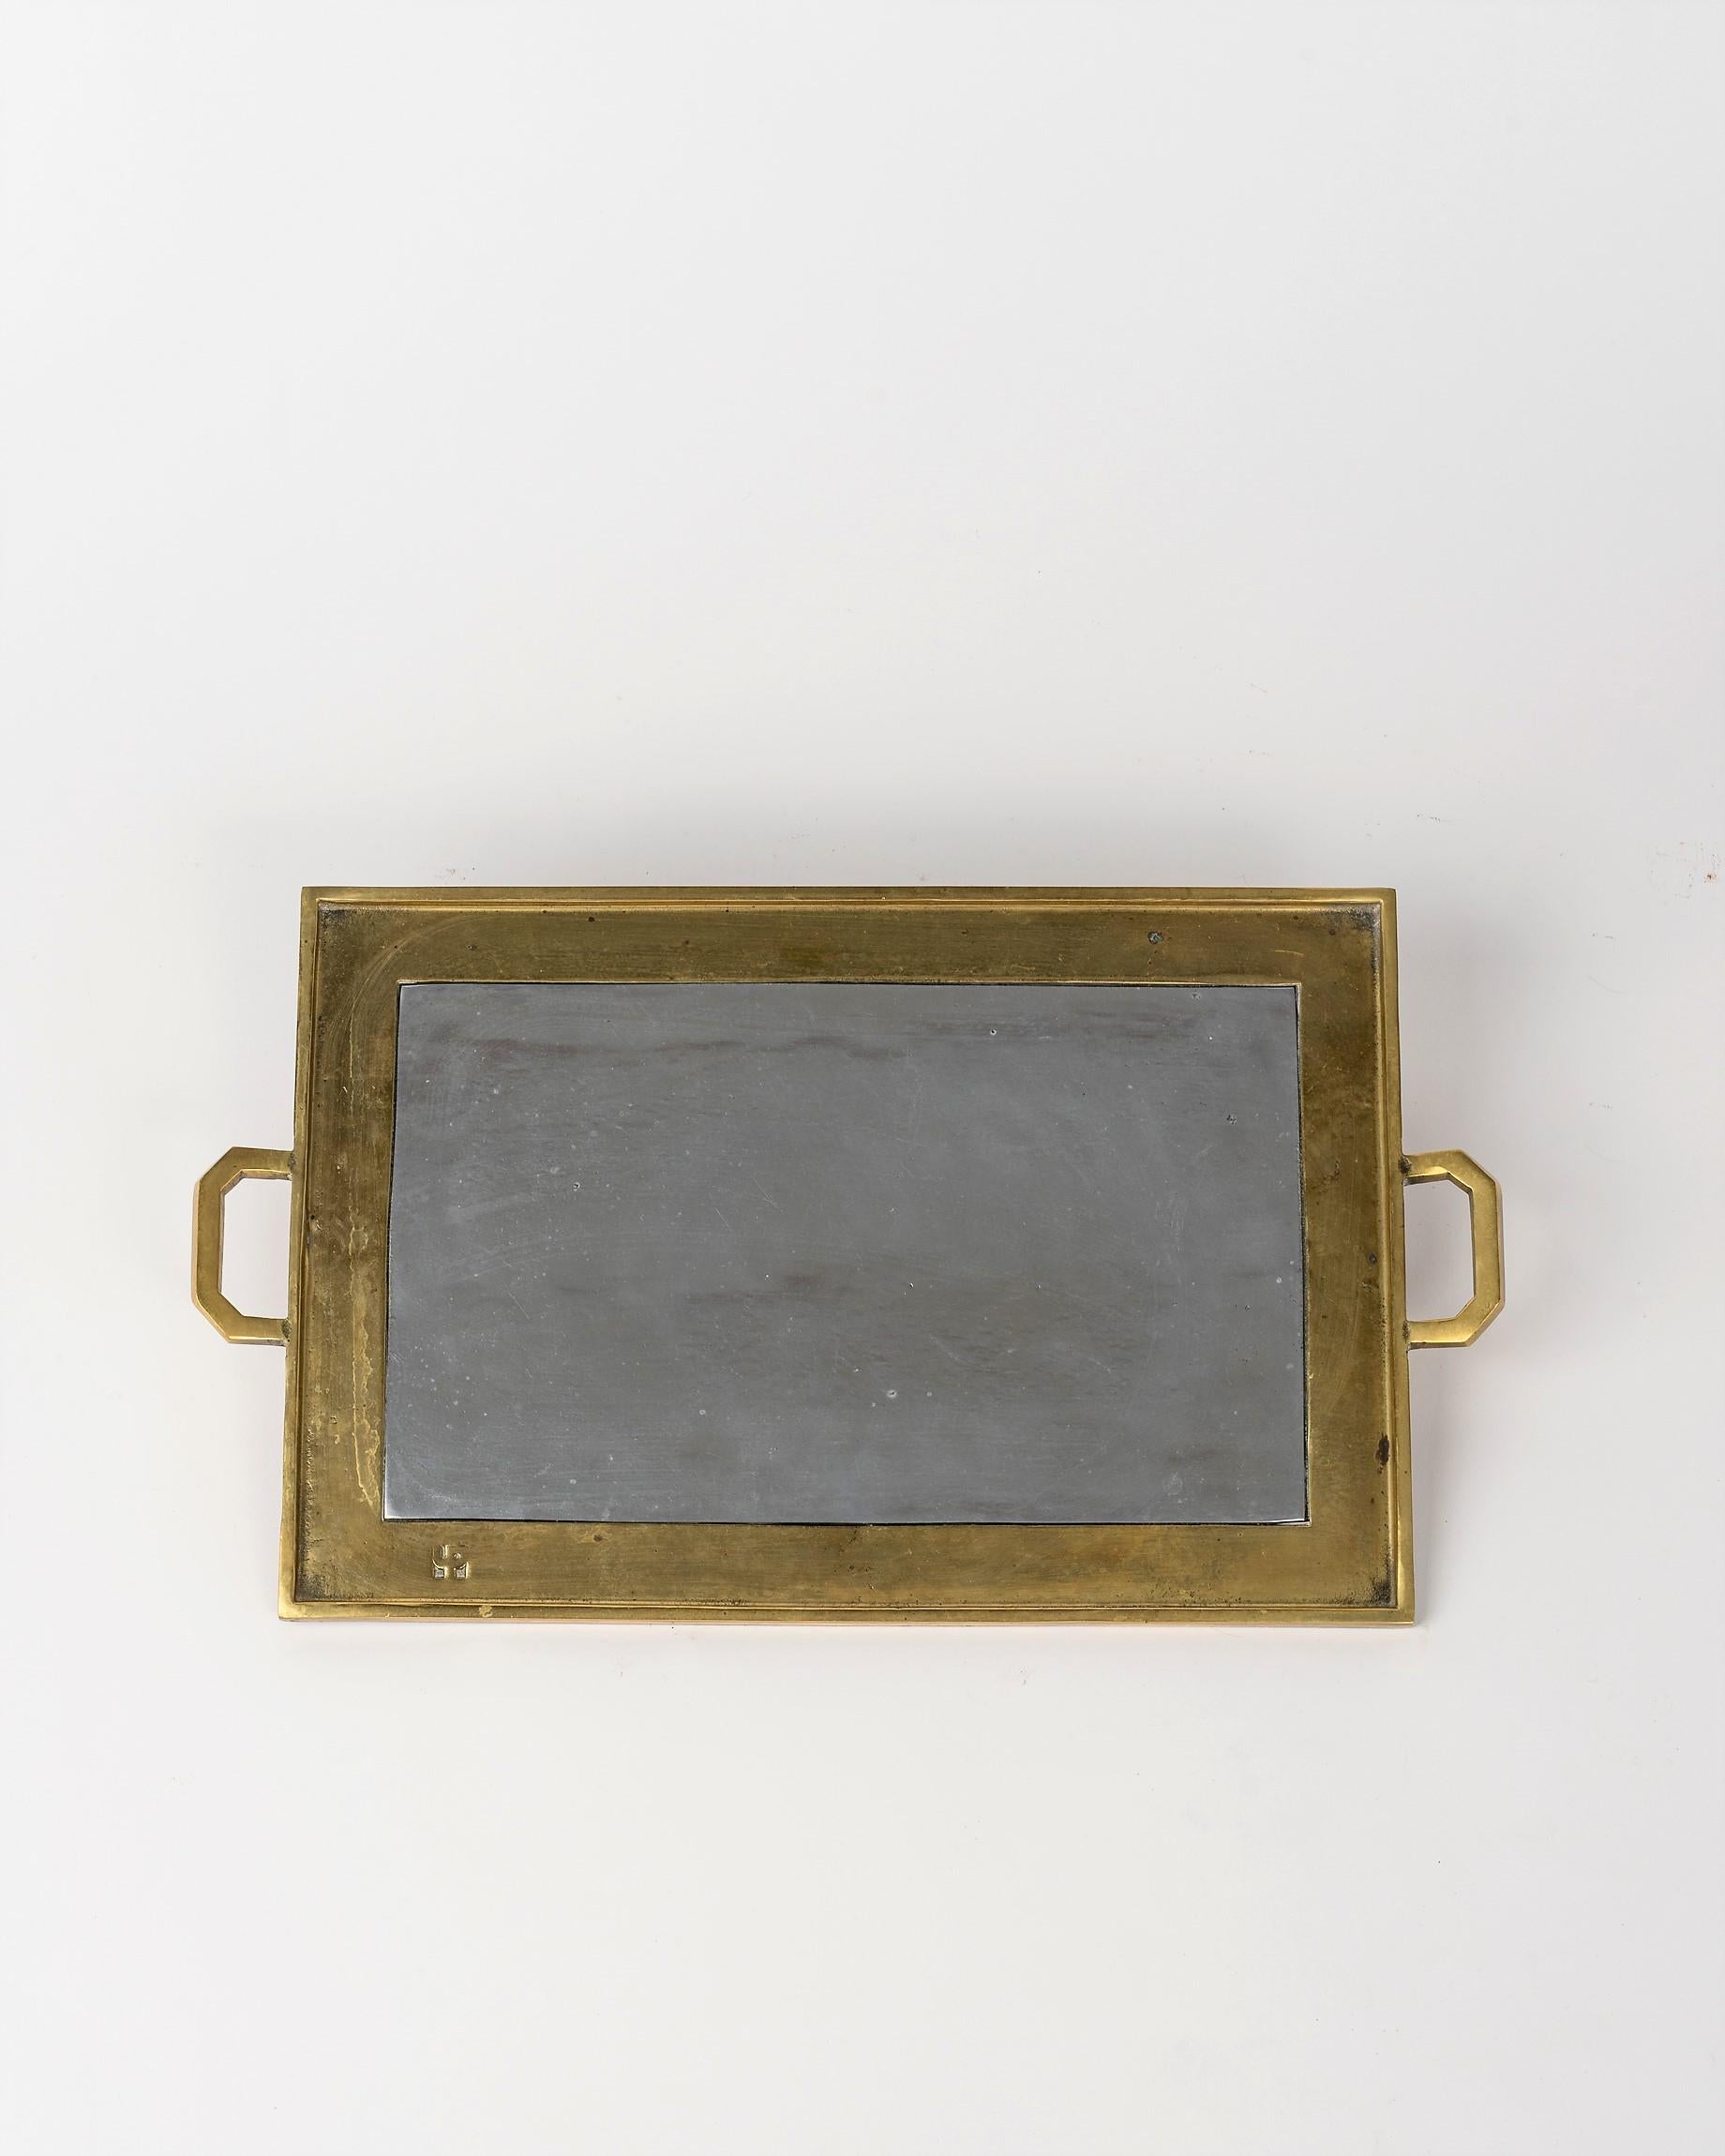 Rare Minimalist tray made of bronze and cast aluminum
Bronze handles
minor angle starting at two thirds of the width 
Signed on the upper right corner ;
Sits on original suede felt
this piece will ship from France and can be returned to either